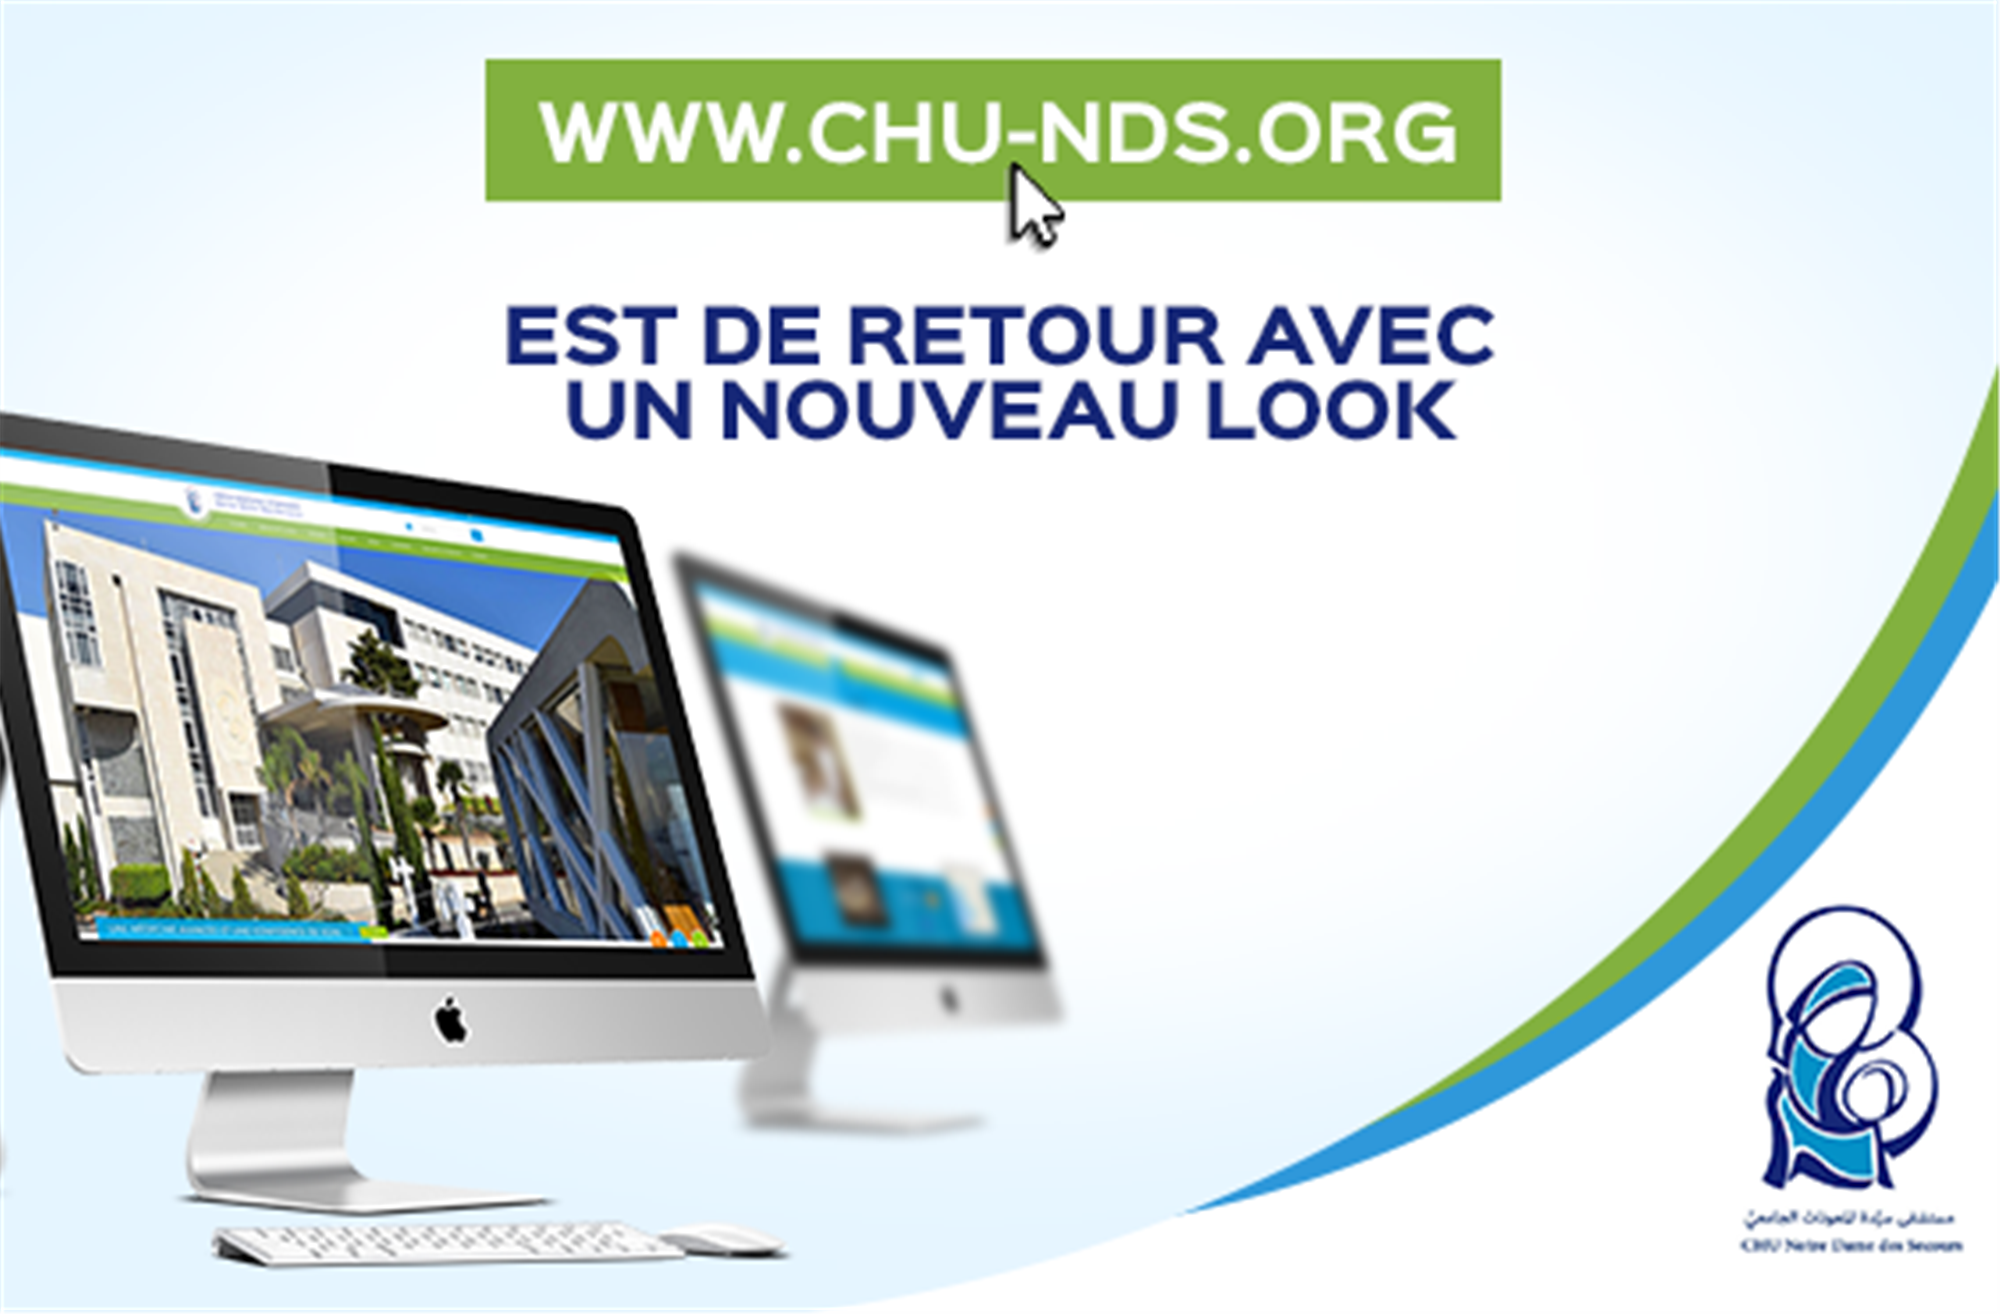 www.chu-nds is back with a new look